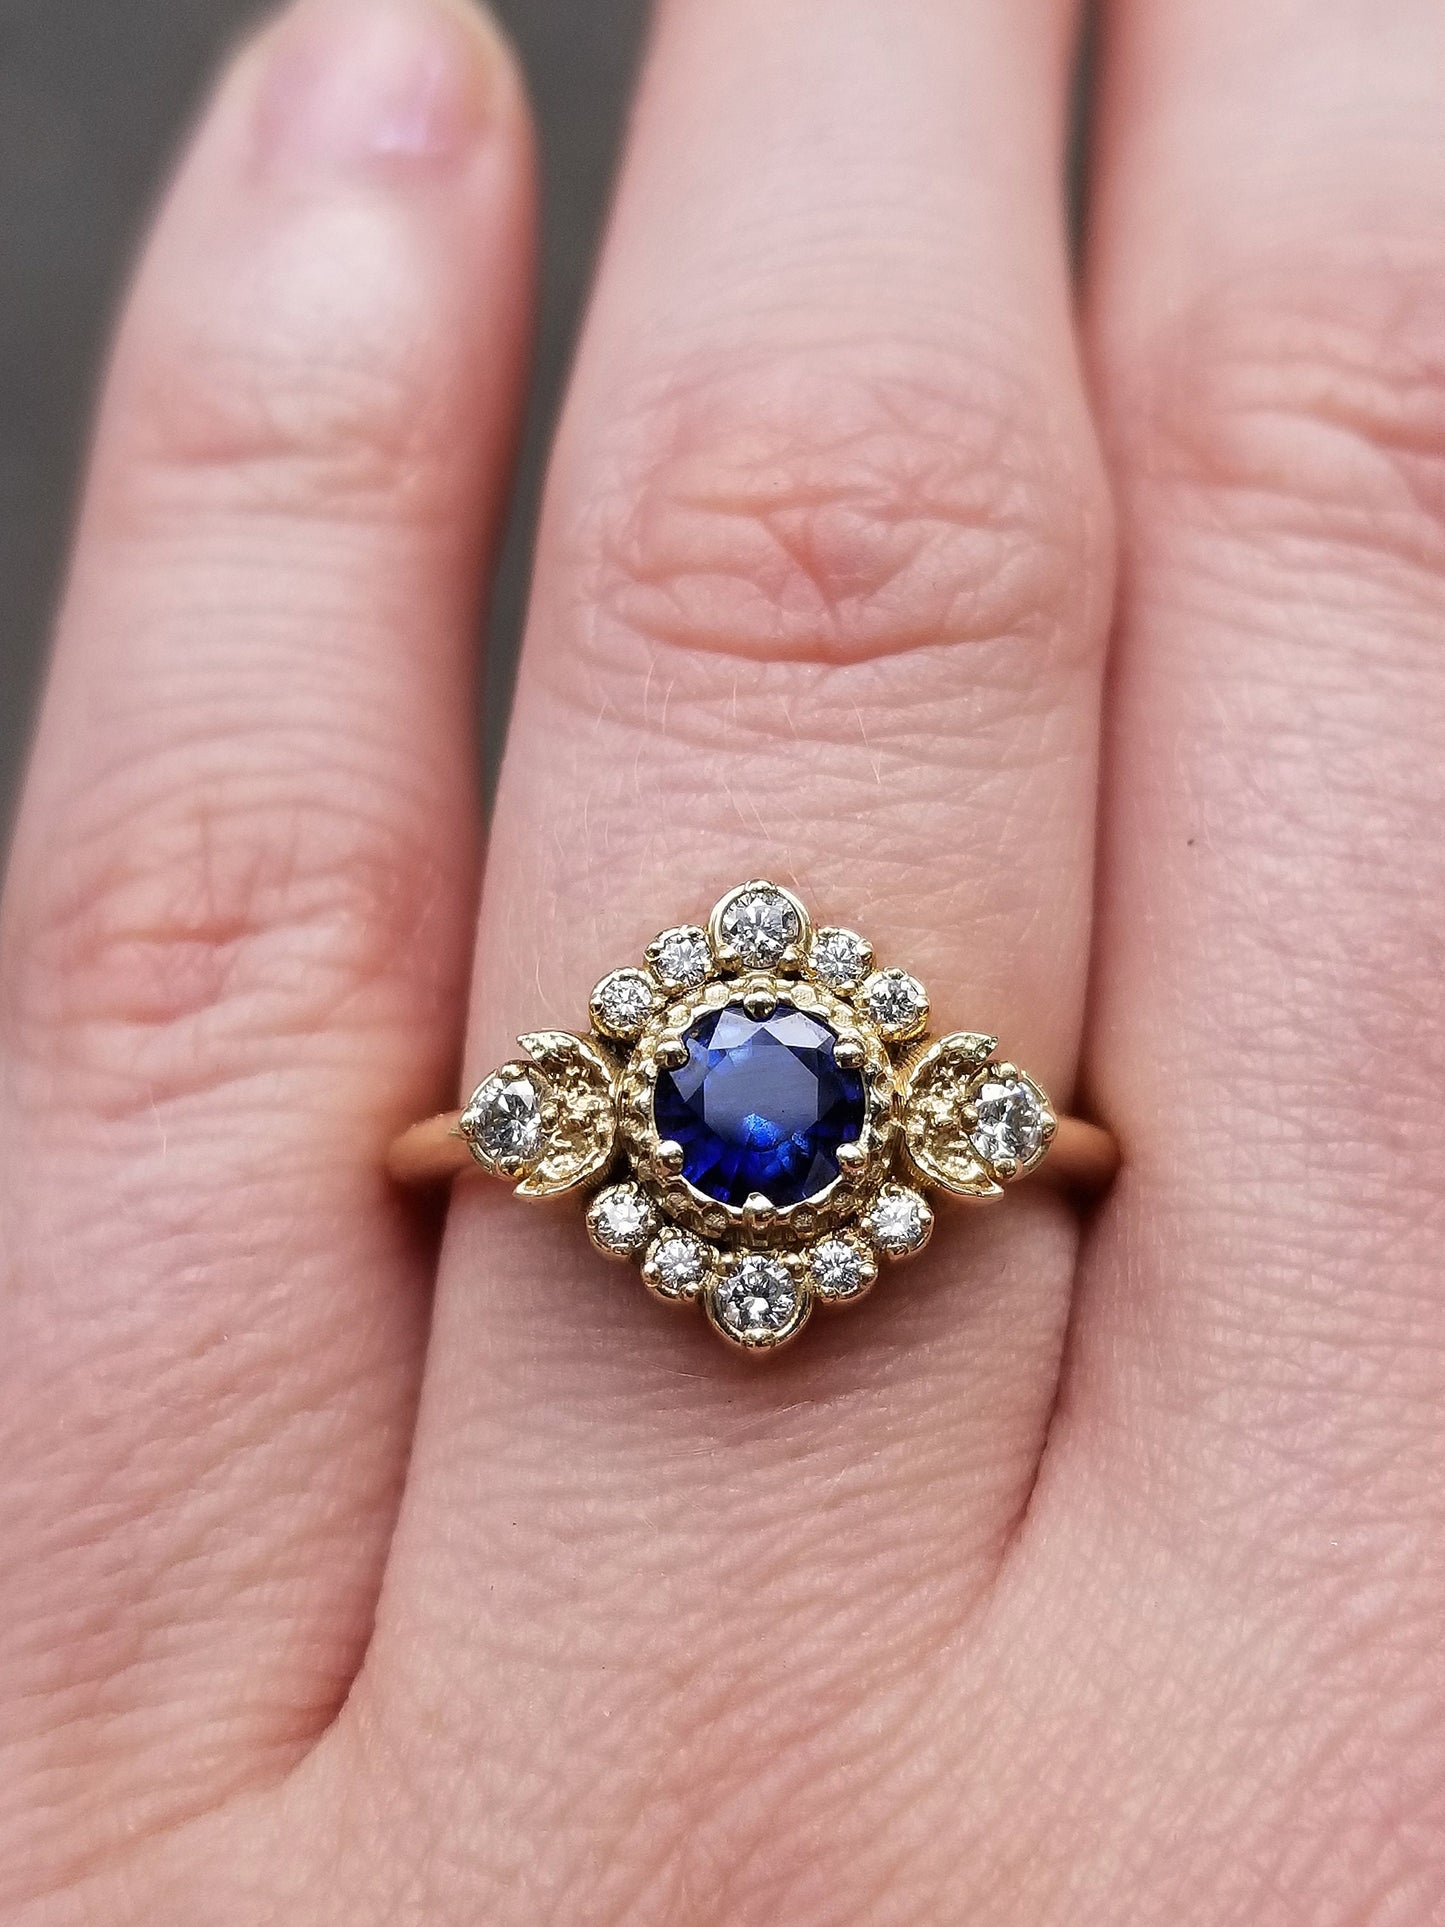 Ready to Ship Size 6 - 8 - Blue Moon Halo Sapphire Engagement Ring Set with Double Chevron Wedding Band - 14k Yellow Gold - Handmade Jewelry